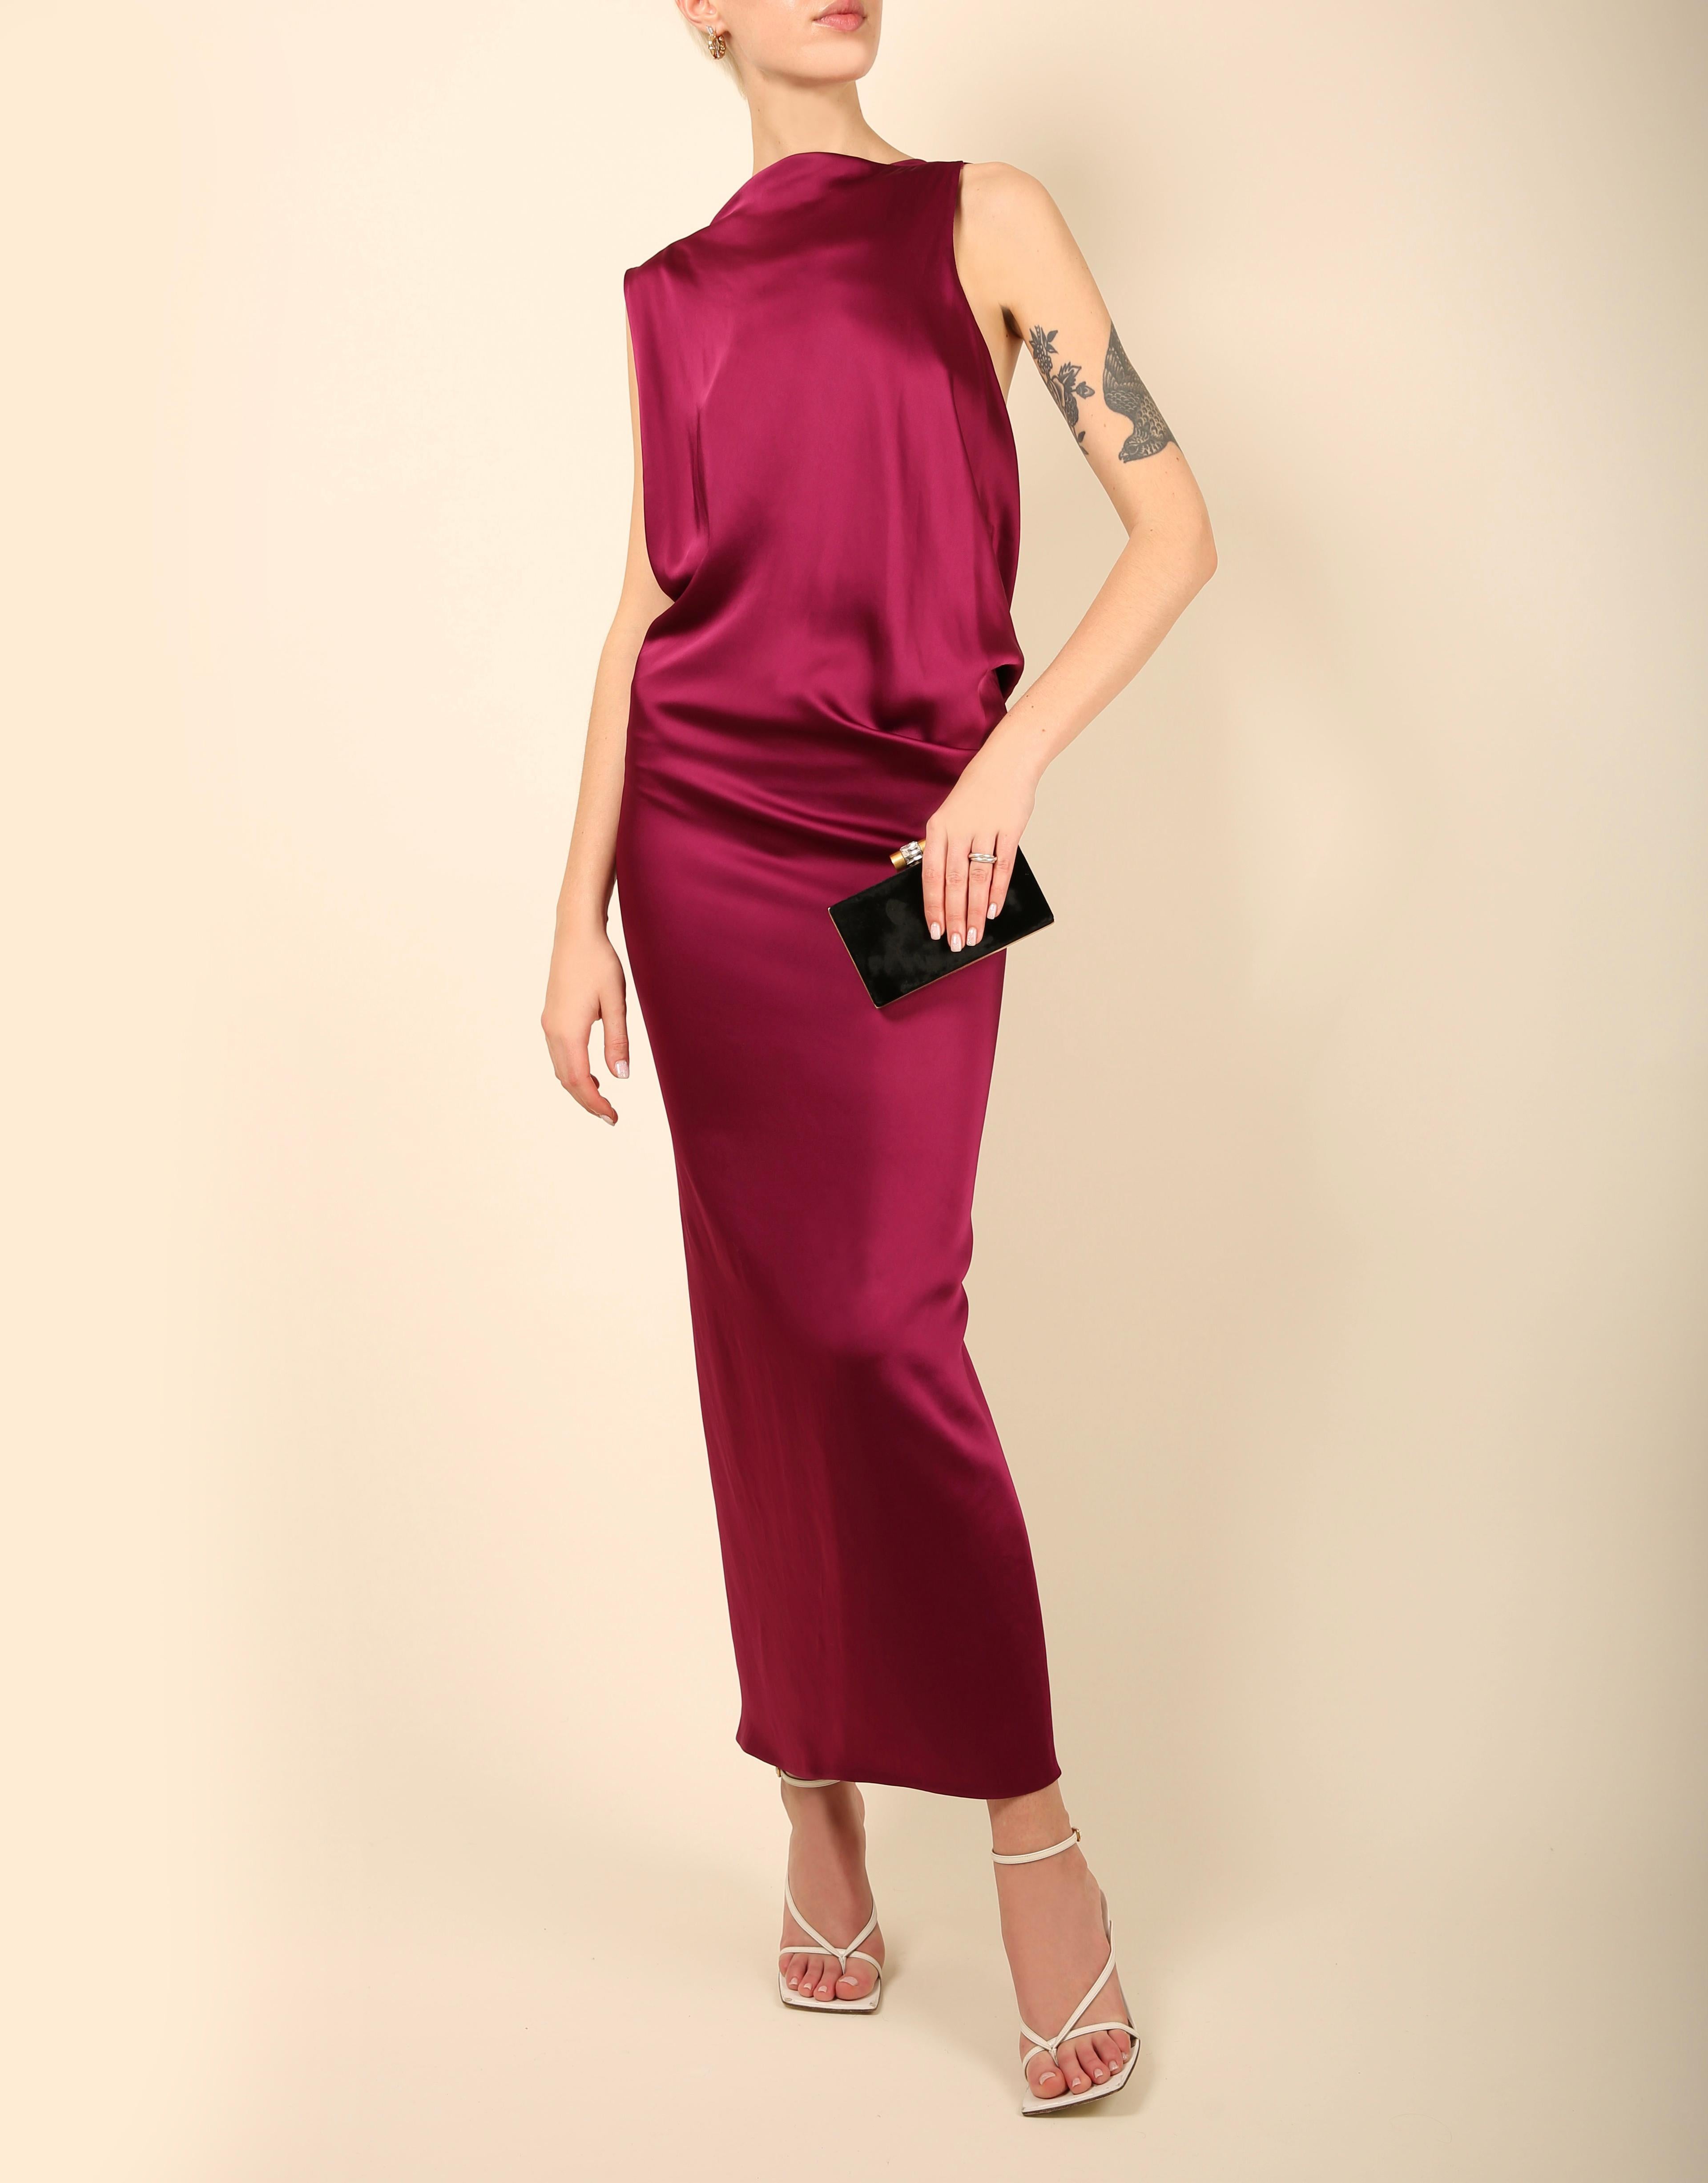 A beautiful floor length dress by Stella McCartney
Please take note that our model is very tall so measurements are listed below to determine the length
Deep shade of magenta 
Sleeveless with a completely backless cut and two semi asymmetrical